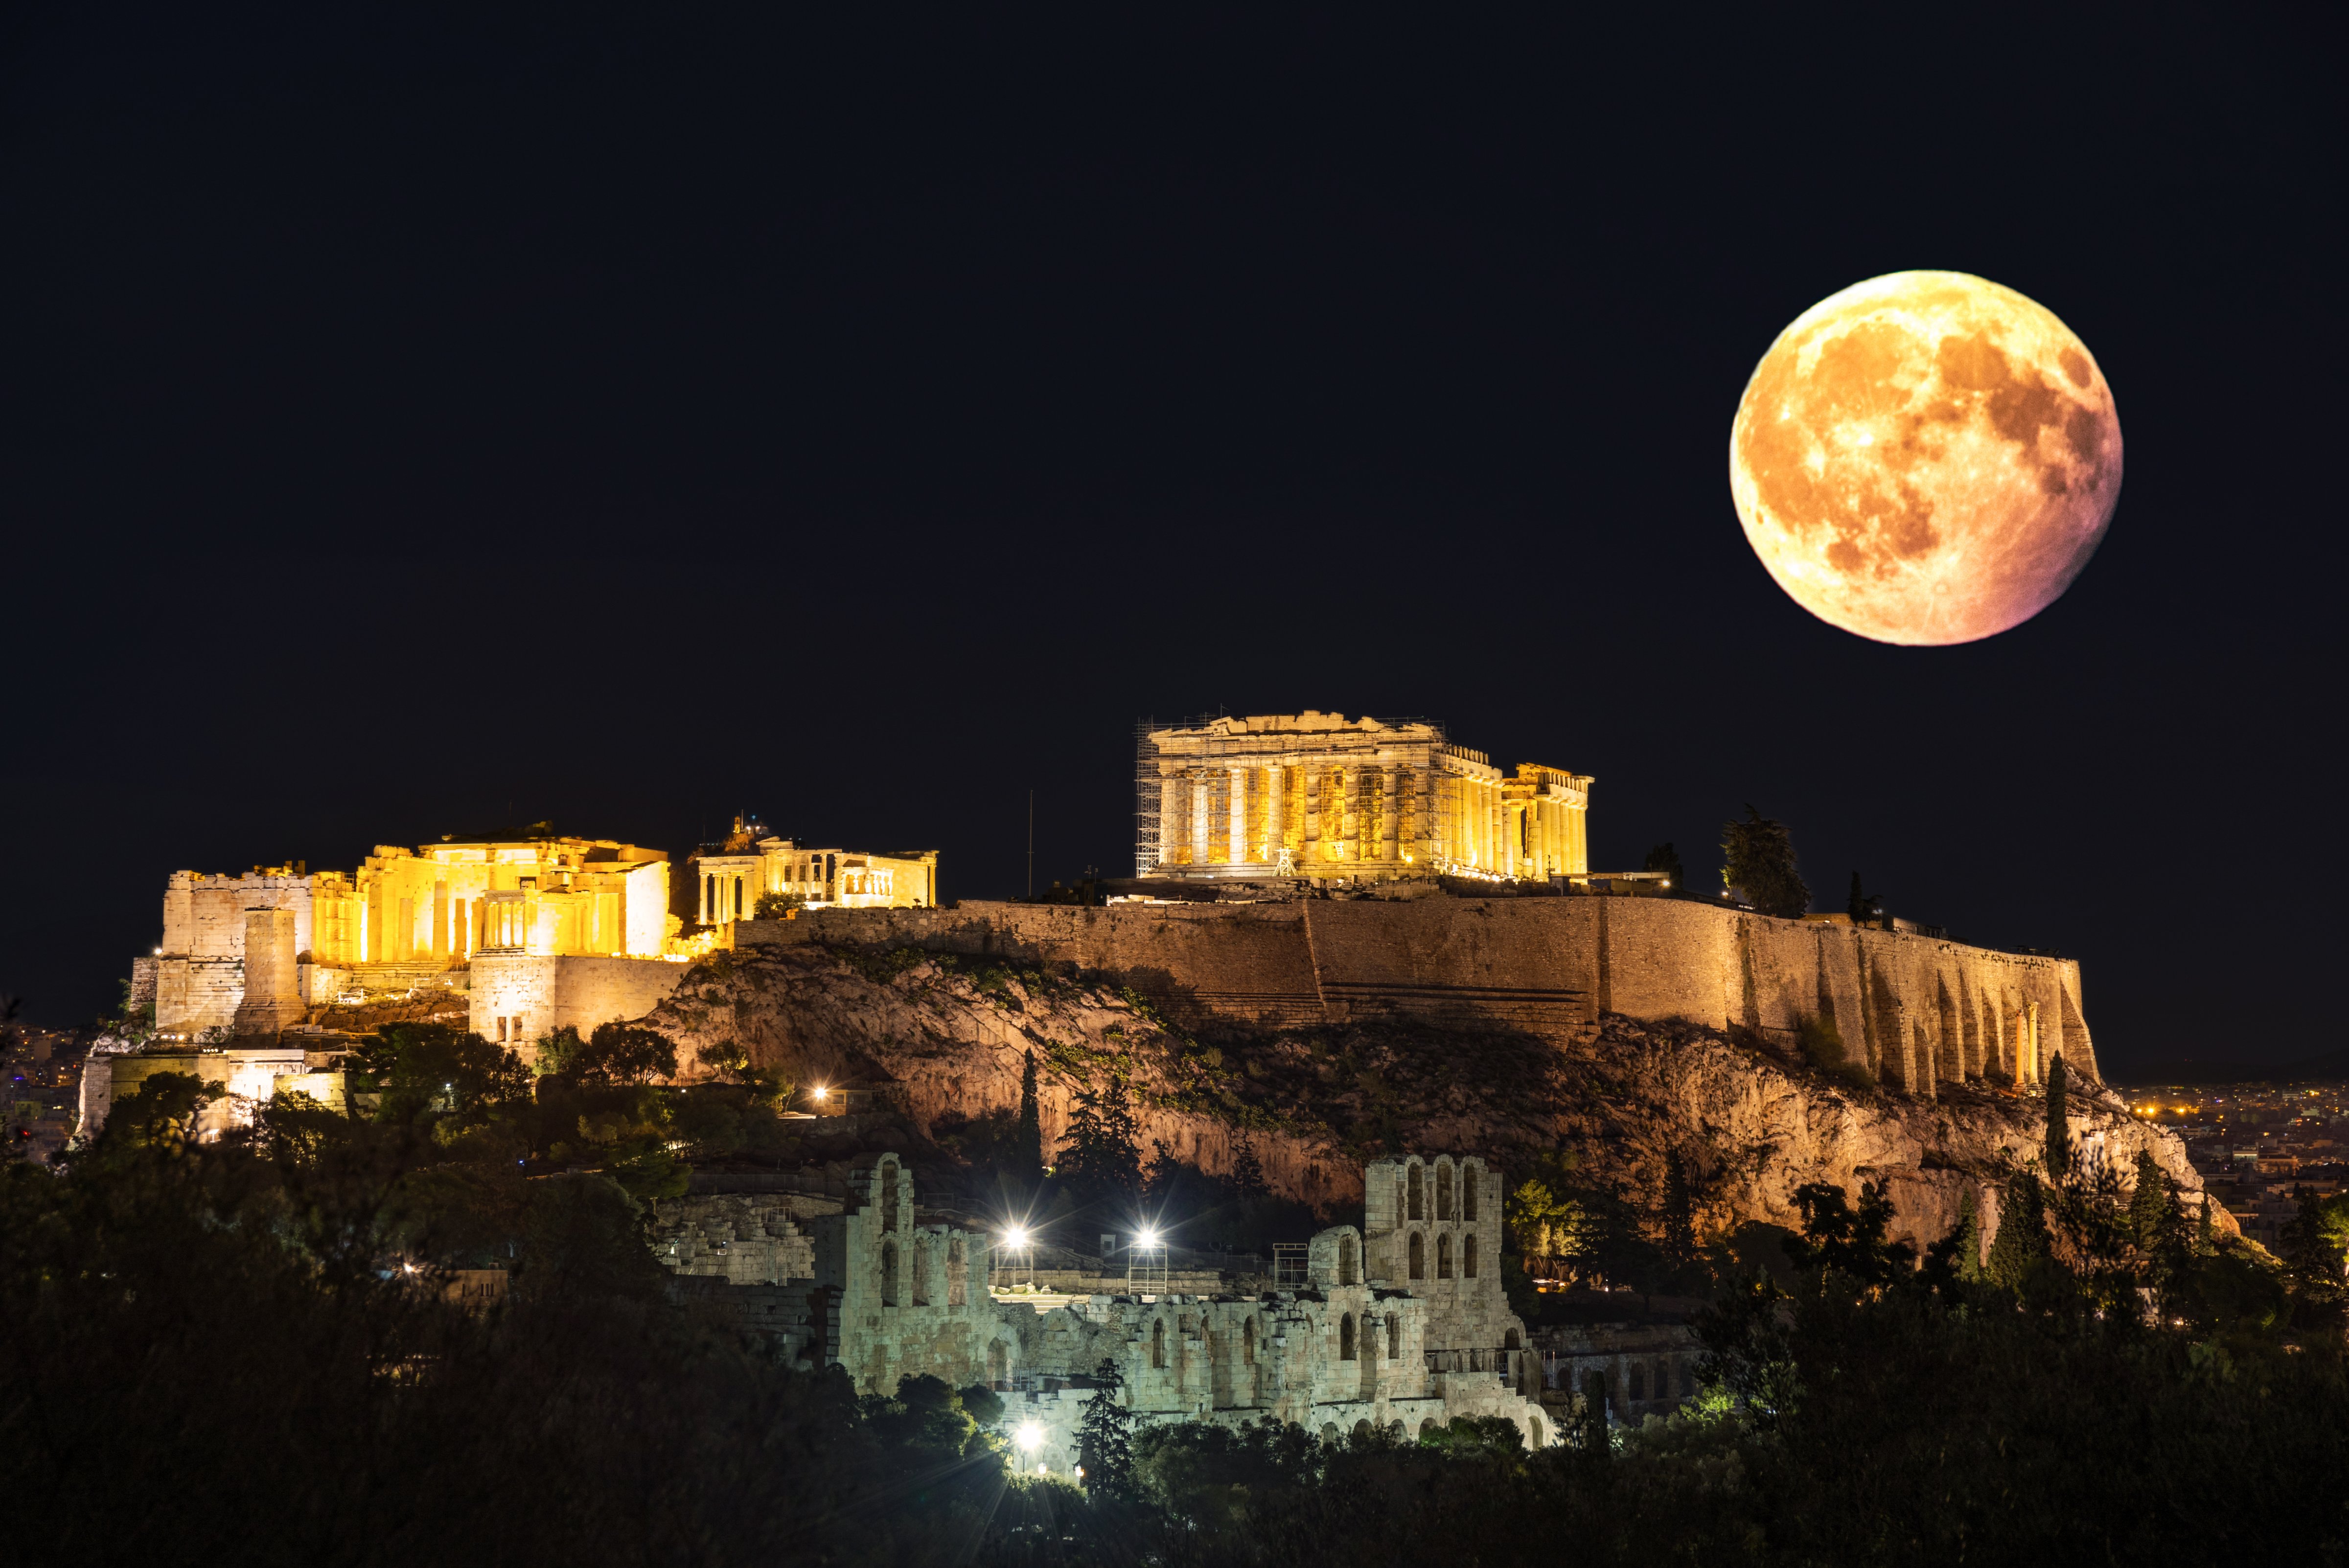 Super moon over the Acropolis in Athens, Greece